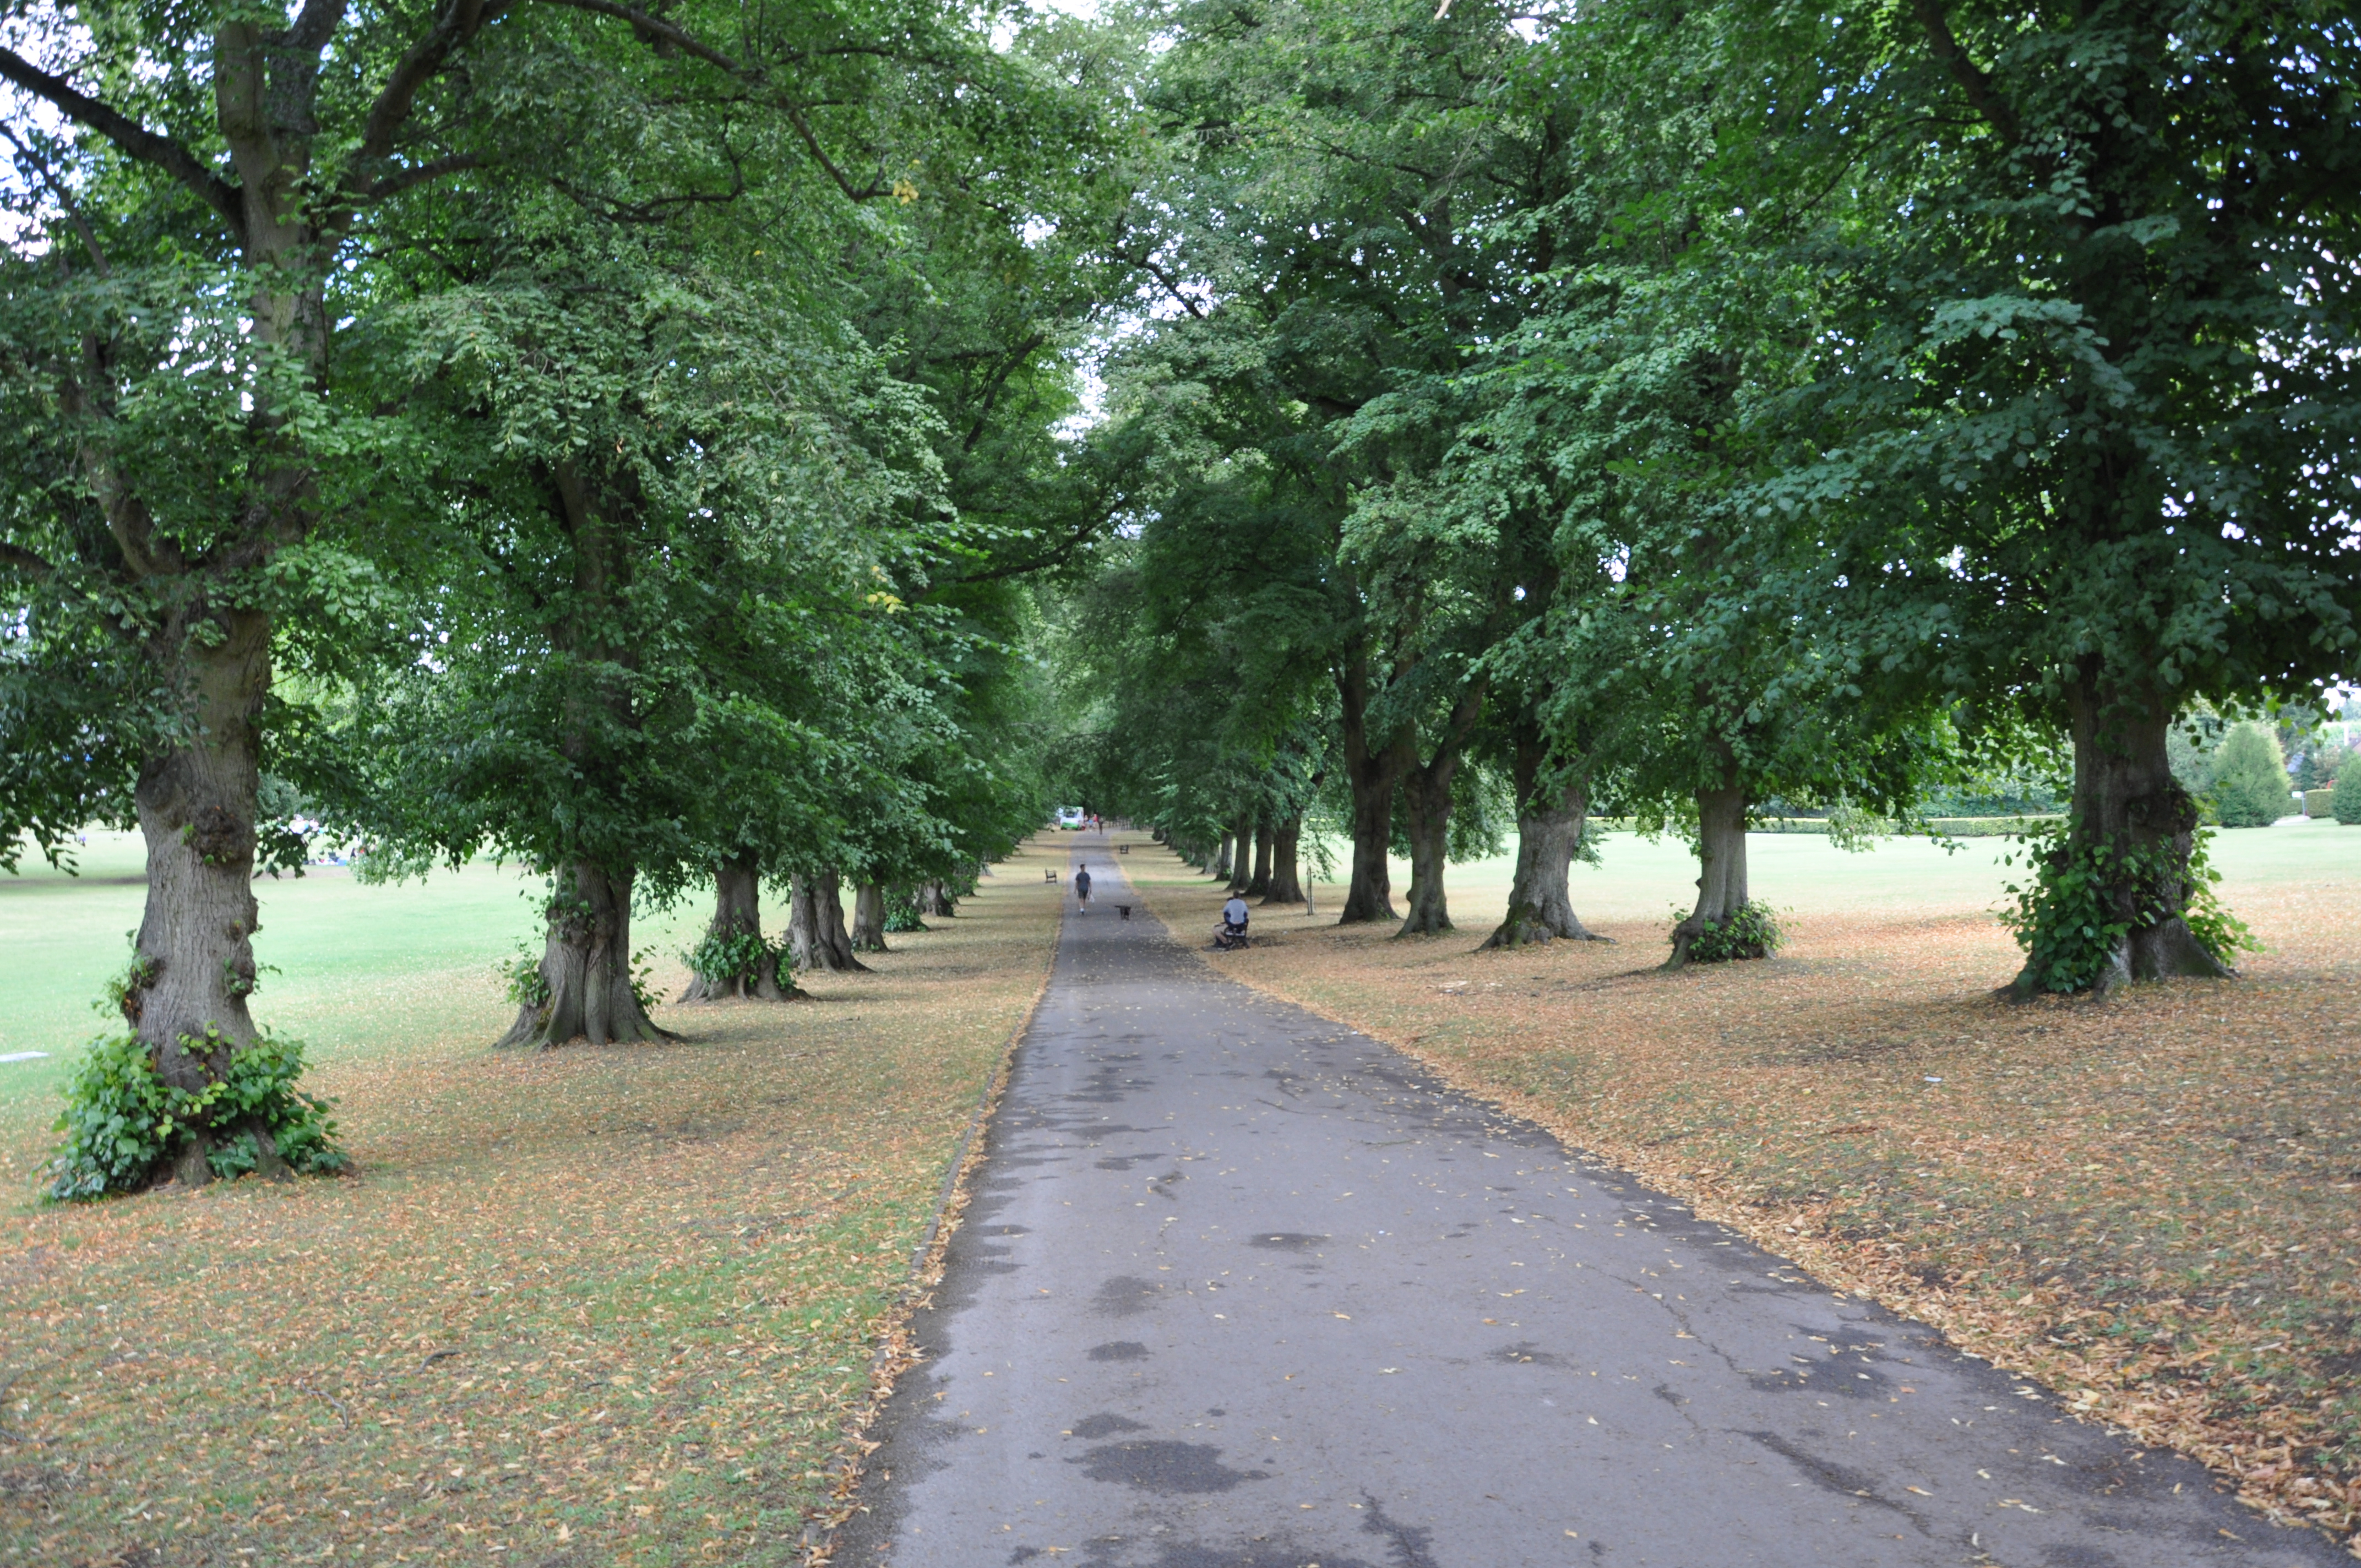 Rothamsted Park